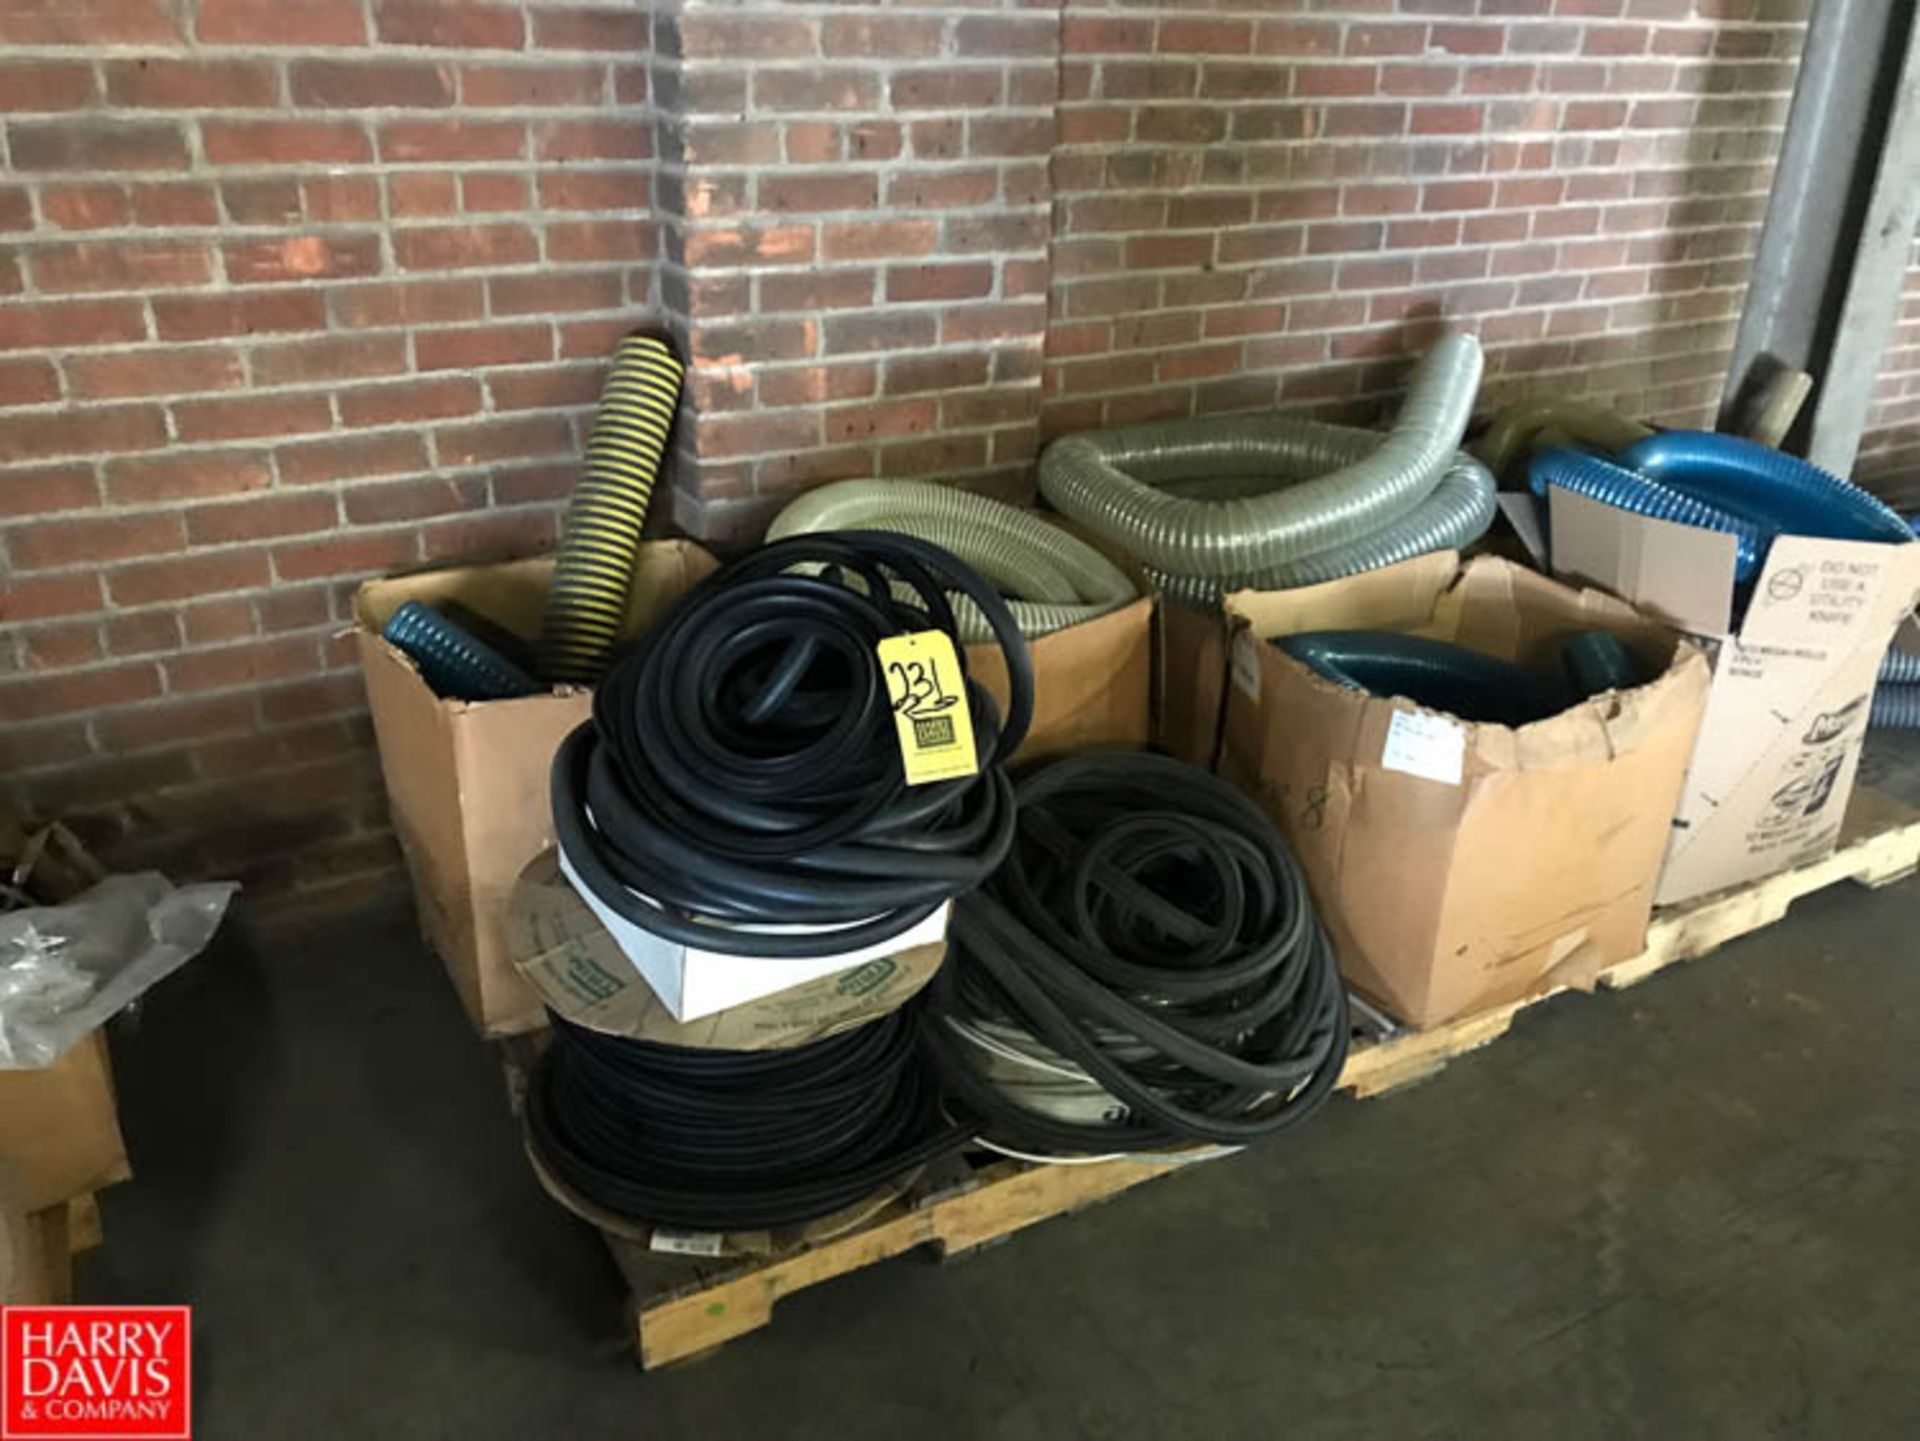 Assorted Transfer Hoses and Gasket Material Rigging Fee: $ 25